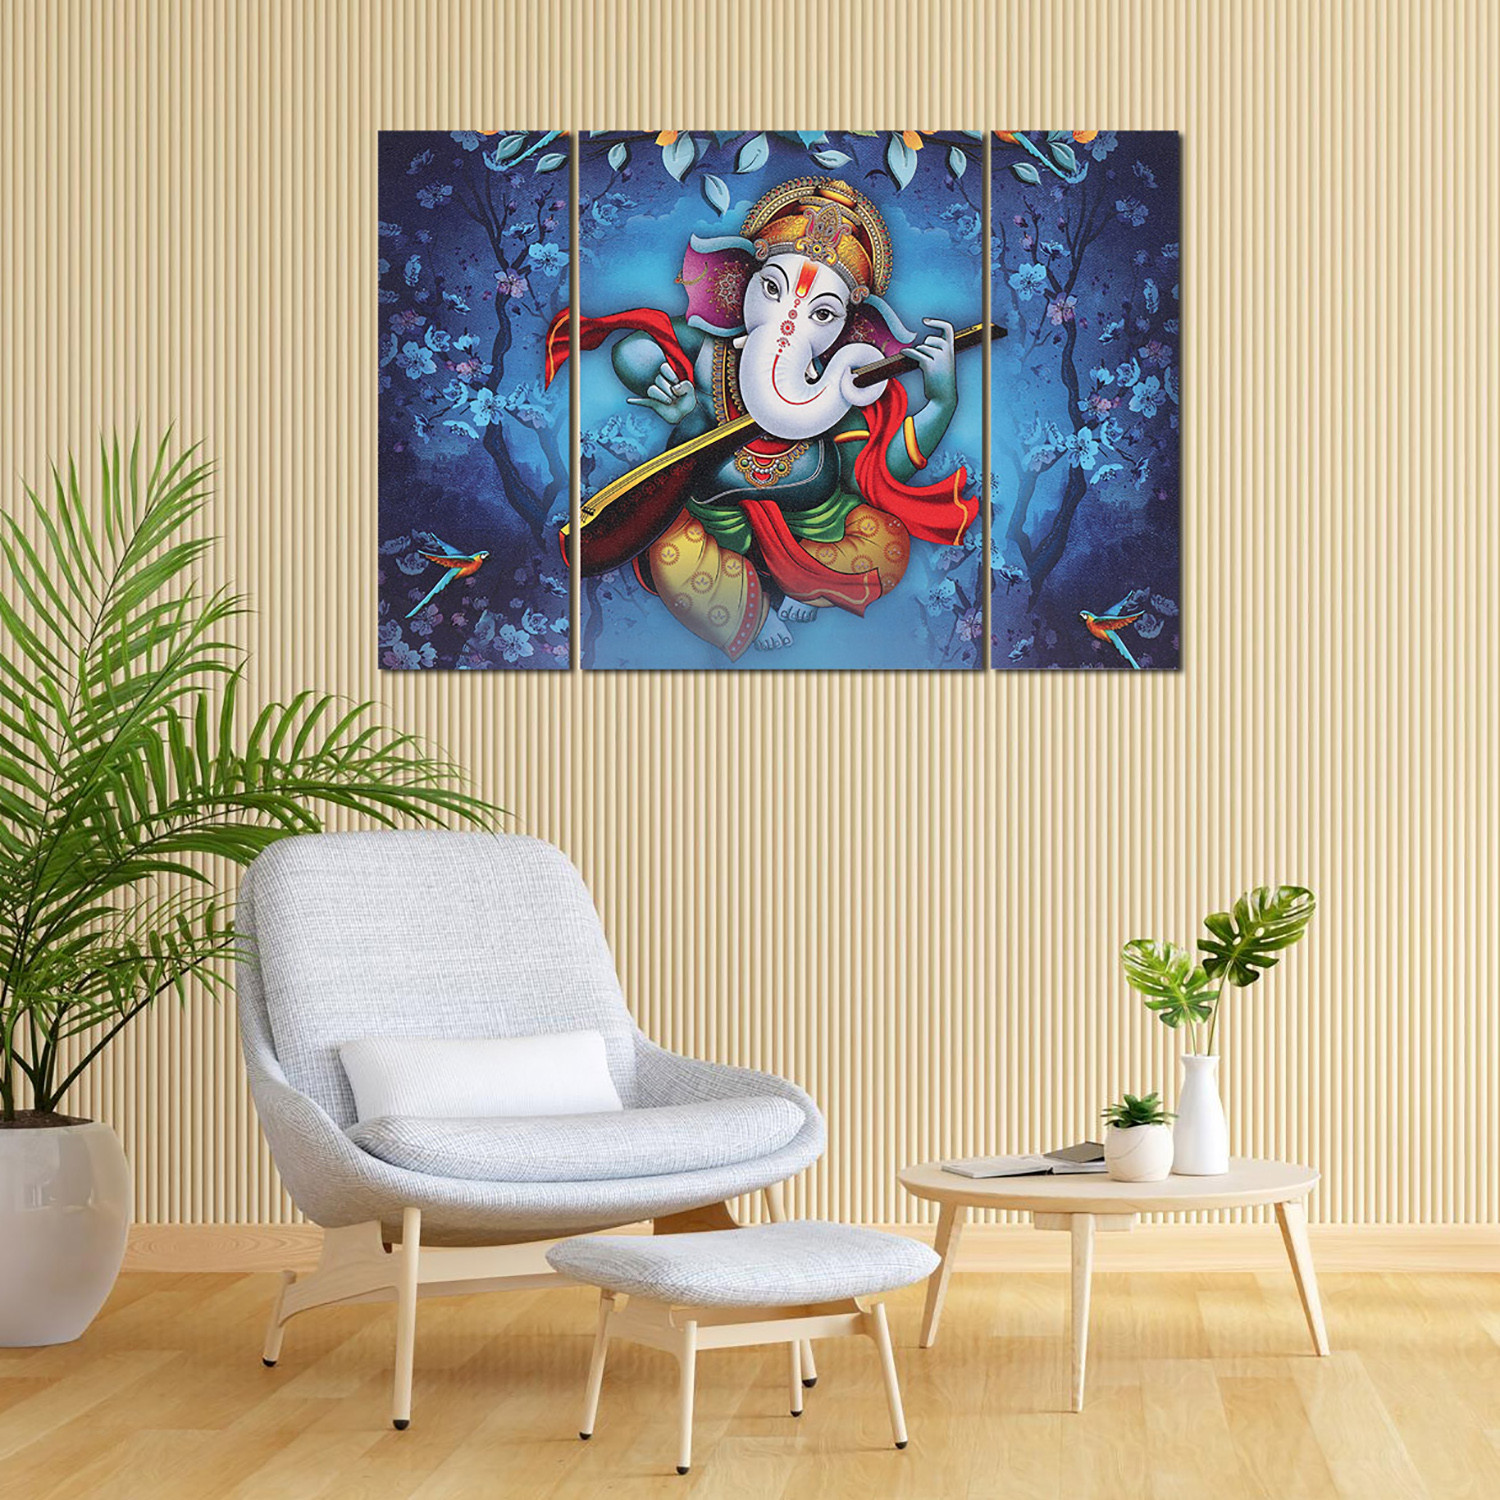 Kuber Industries Wall Paintings | MDF Wooden Wall Art for Living Room |Wall Sculpture | Lord Ganesha Painting for Bedroom | Office | Hotels | Gift | 1218KIG1| Blue